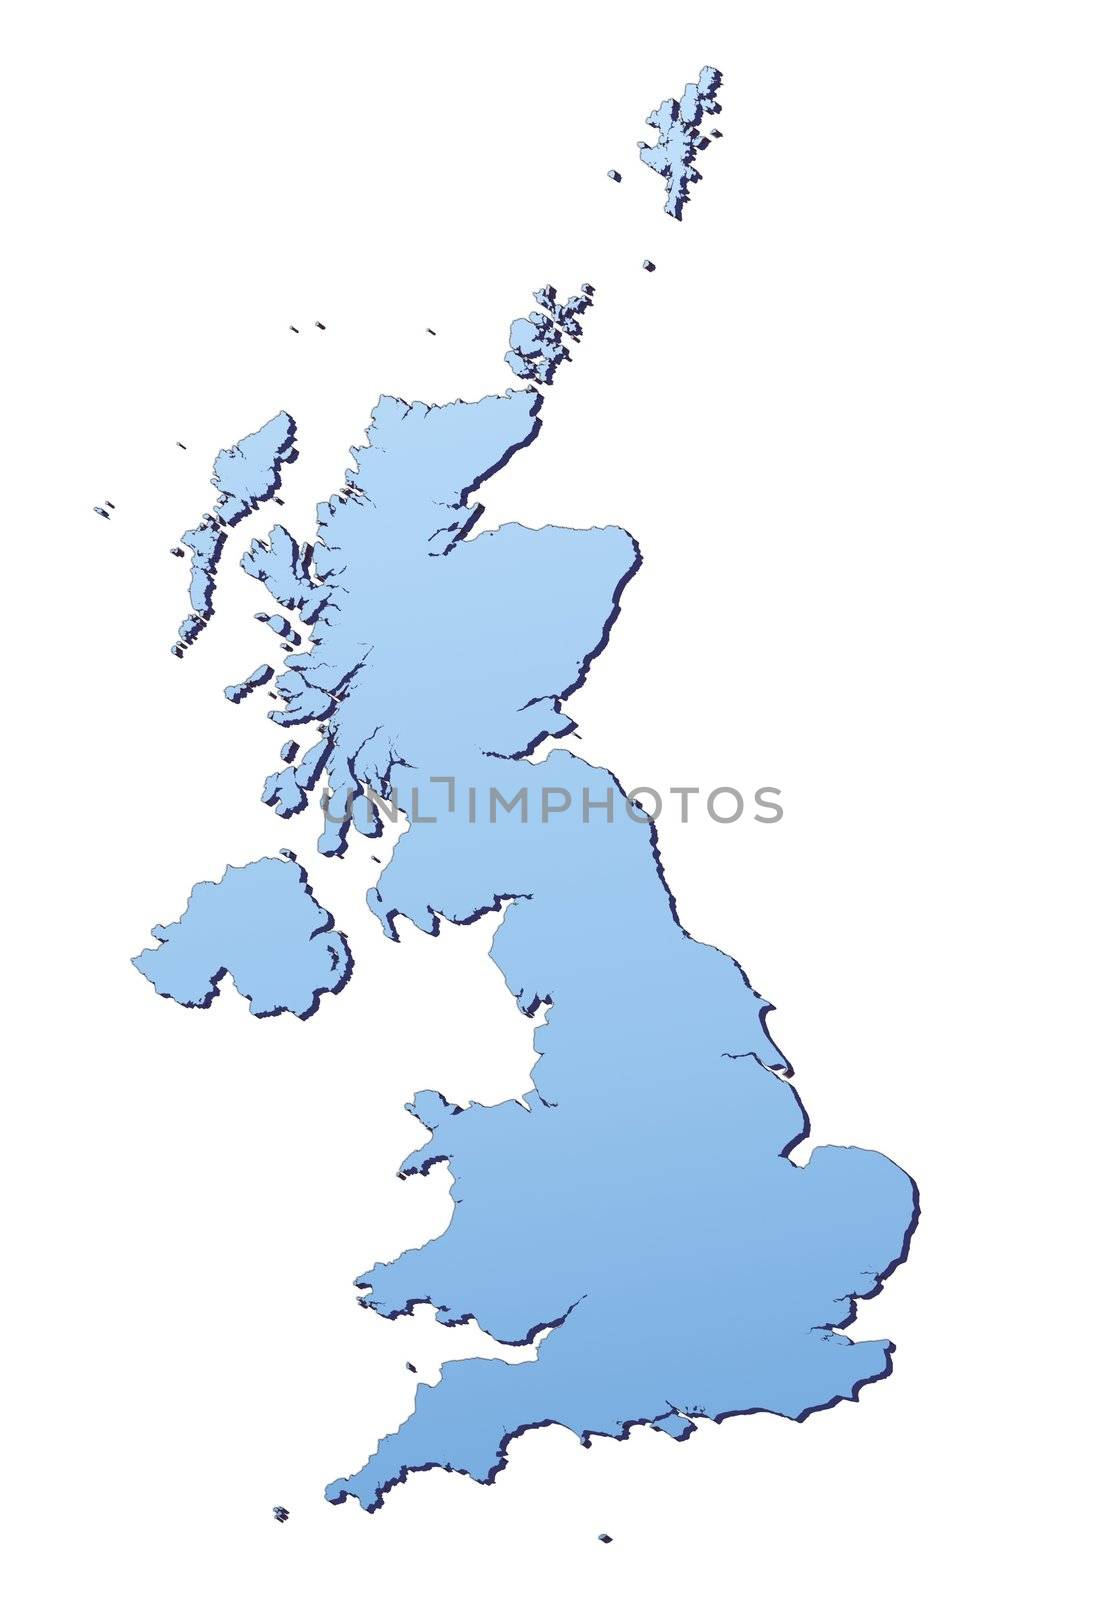 United Kingdom map filled with light blue gradient. High resolution. Mercator projection.